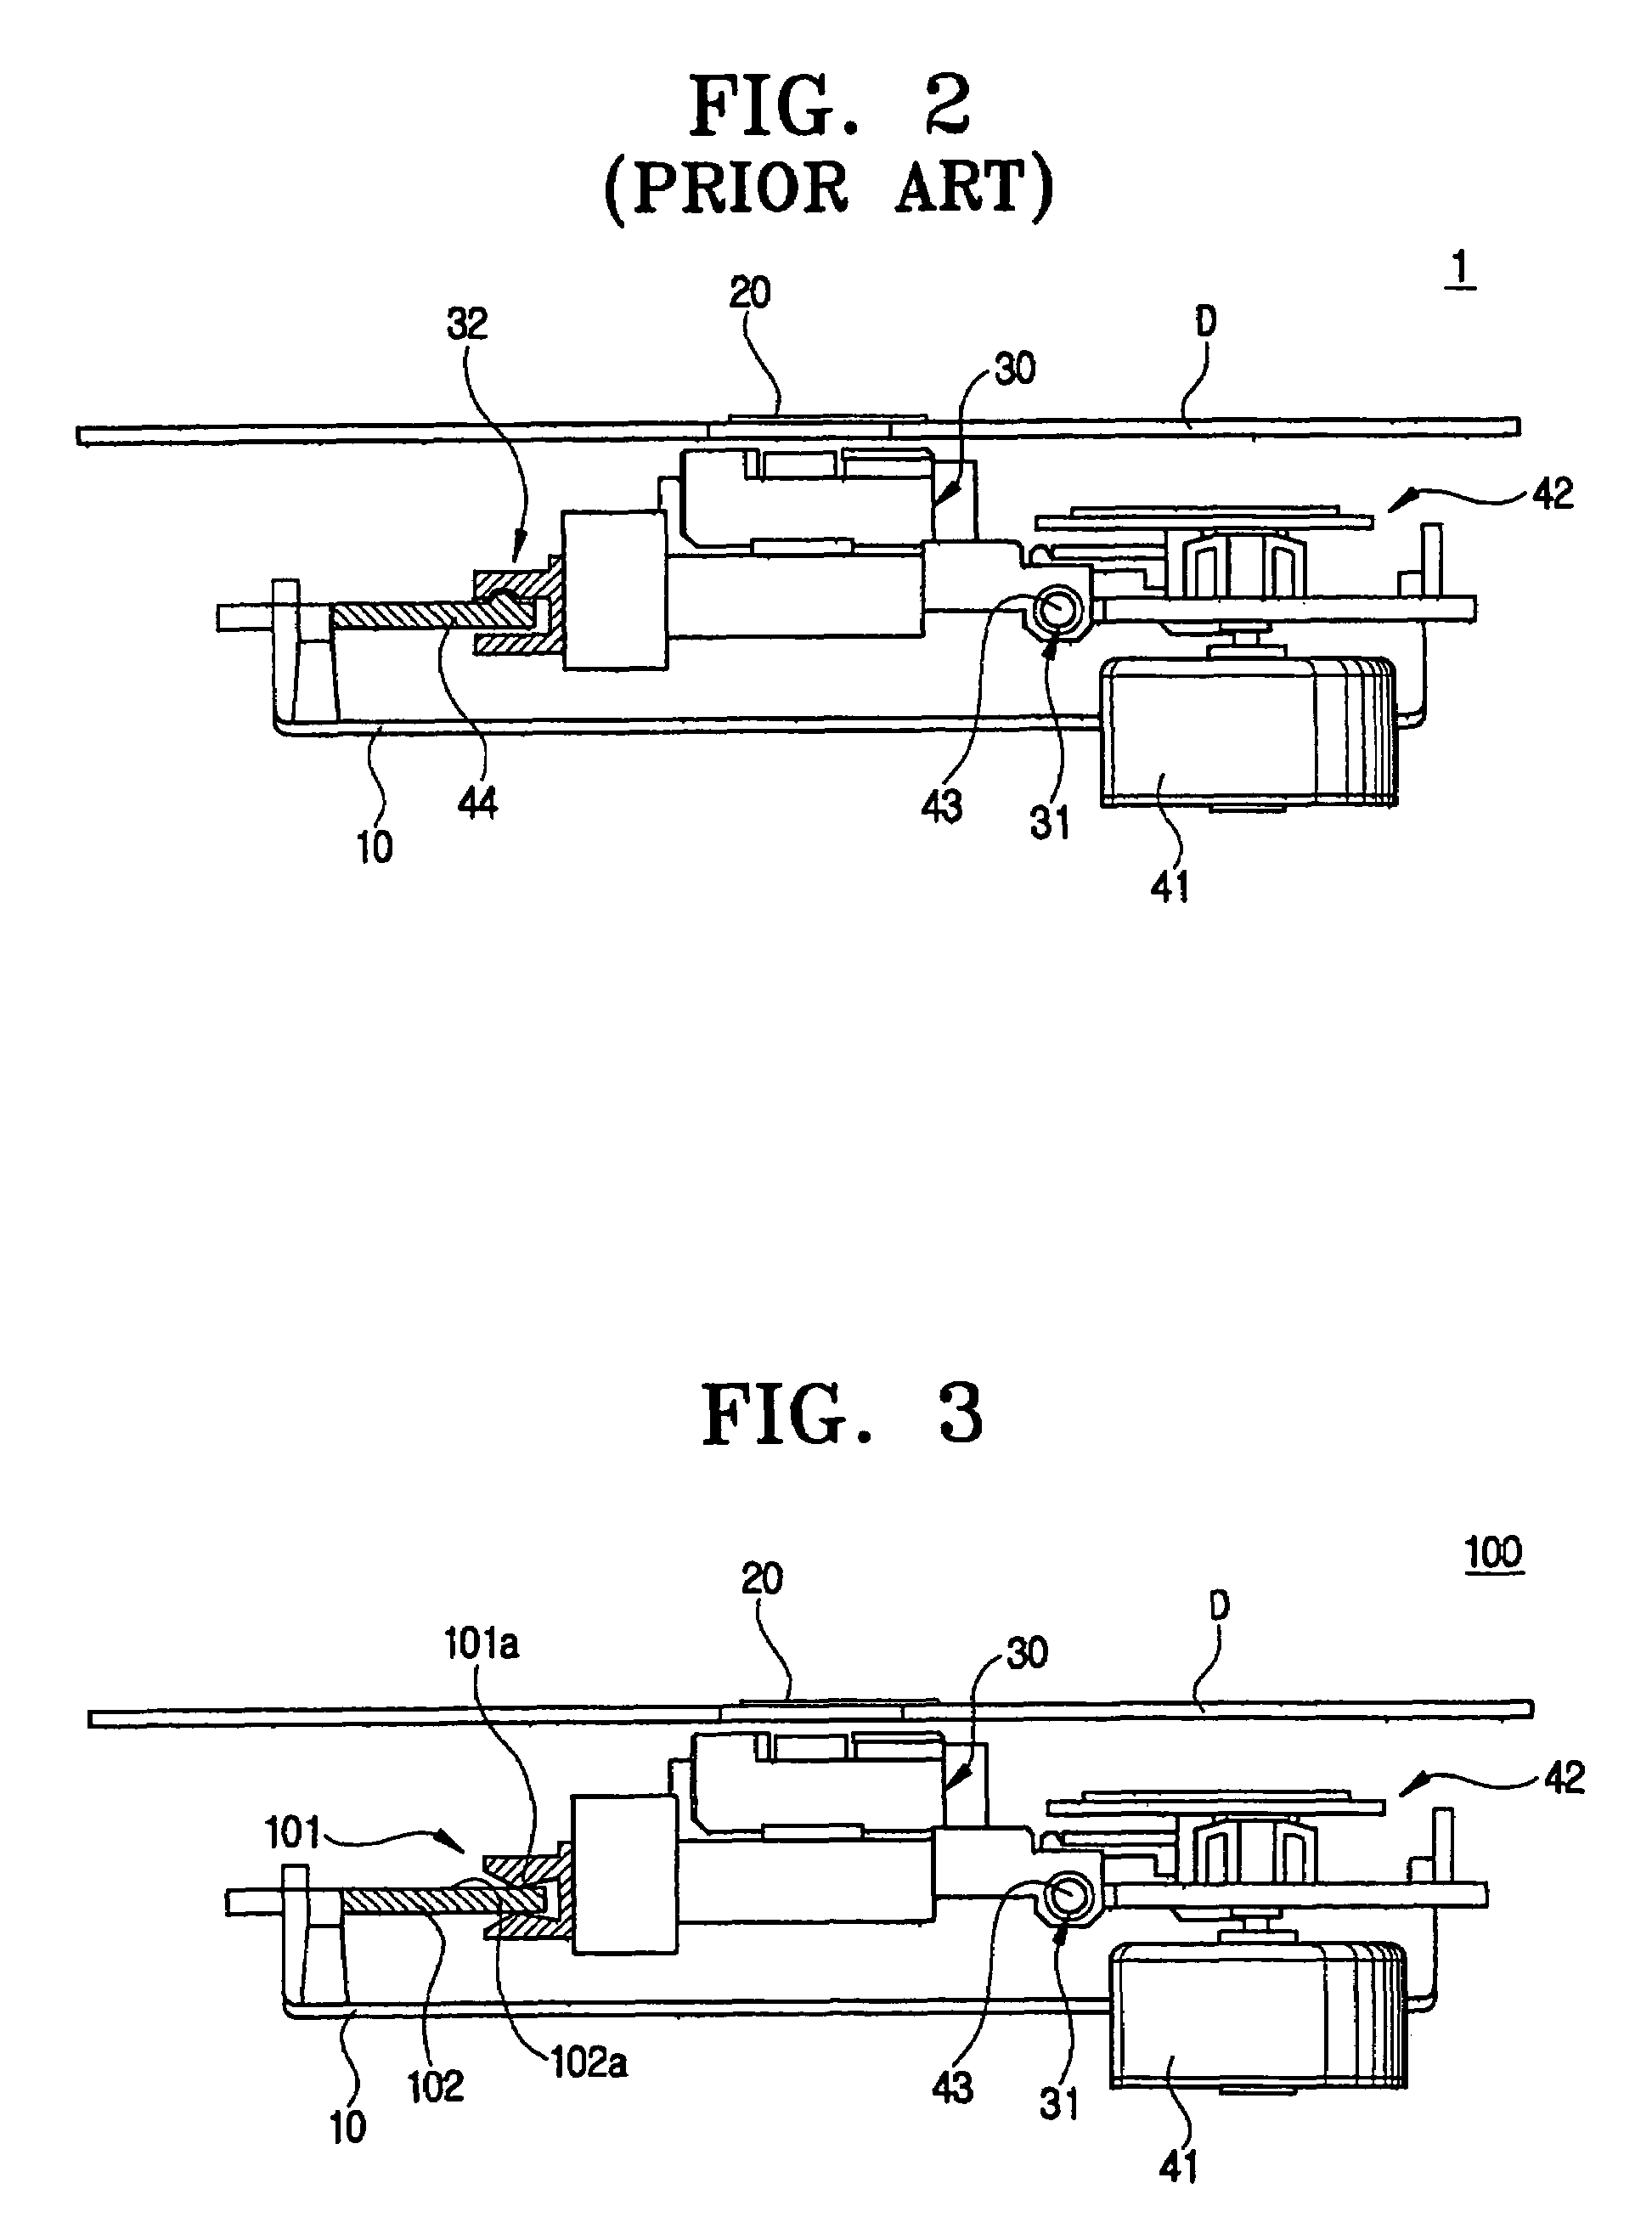 Optical pickup apparatus for optical disc drive having an improved receiving unit